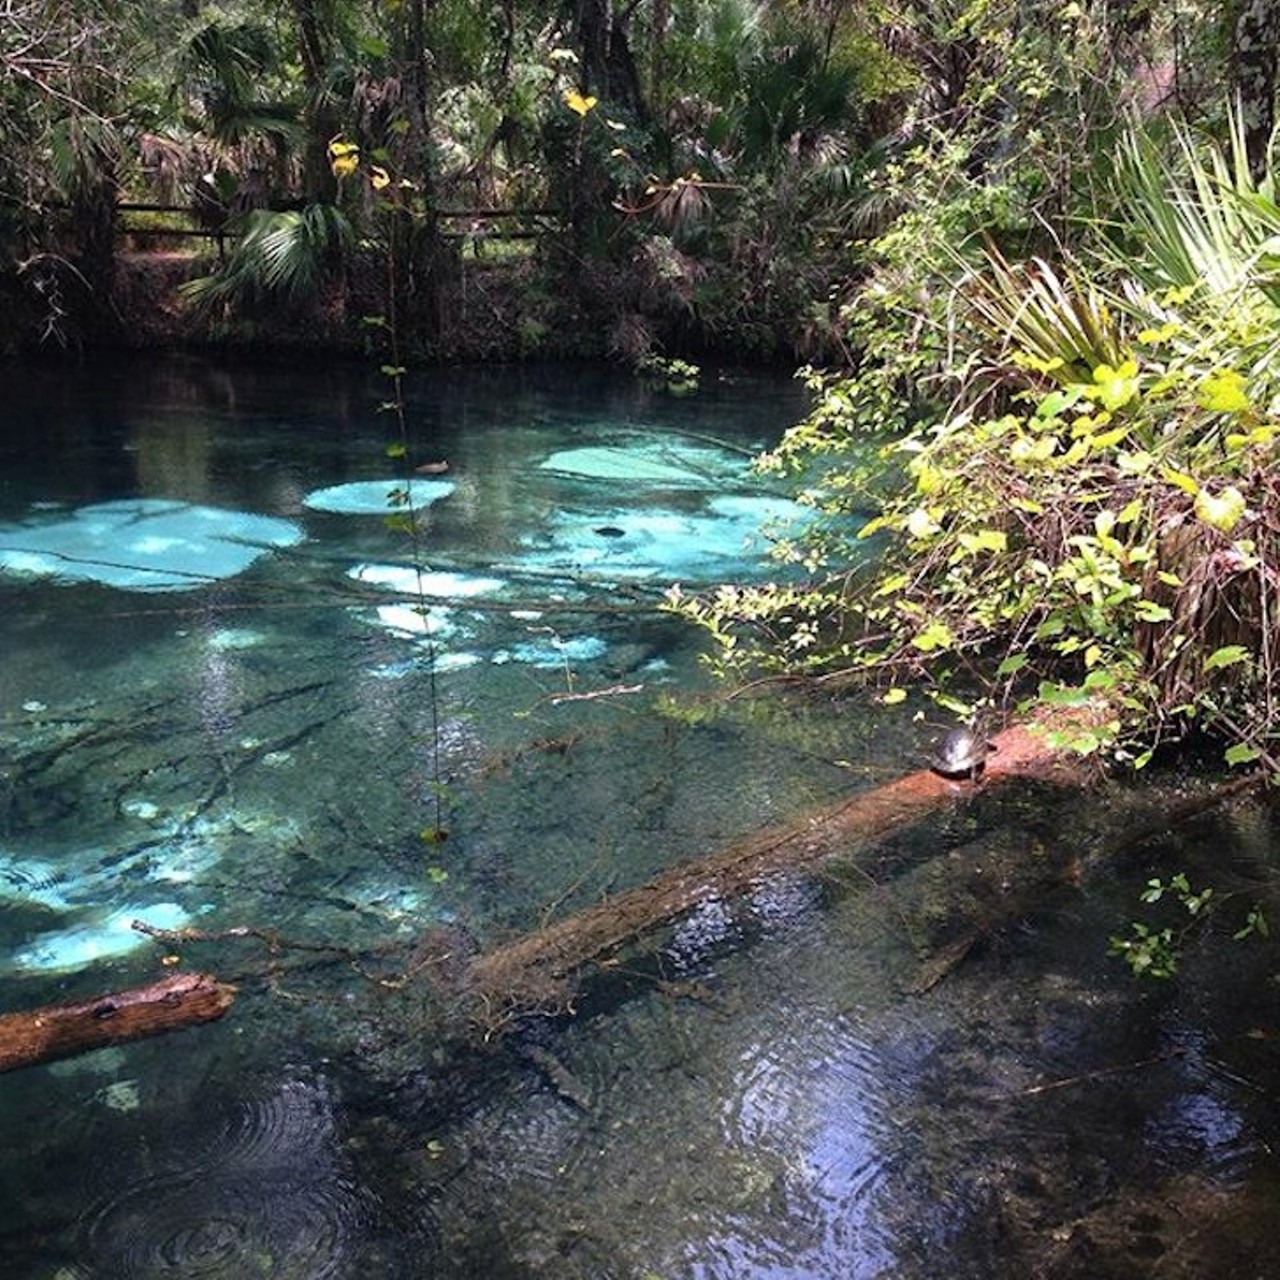 Fern Hammock Springs
10863 E. Highway 40 Silver Springs, FL 34488 | (352) 625-7470 
This big, shallow pool has 25 sand boils scattered on the bottom making it look like there&#146;s a bunch of little personal pools. Walk over the bridge to ensure you get the best picture of this clear spring water that&#146;s varies between sky blue, turquoise and sapphire. 
Photo via codieannie/Instagram